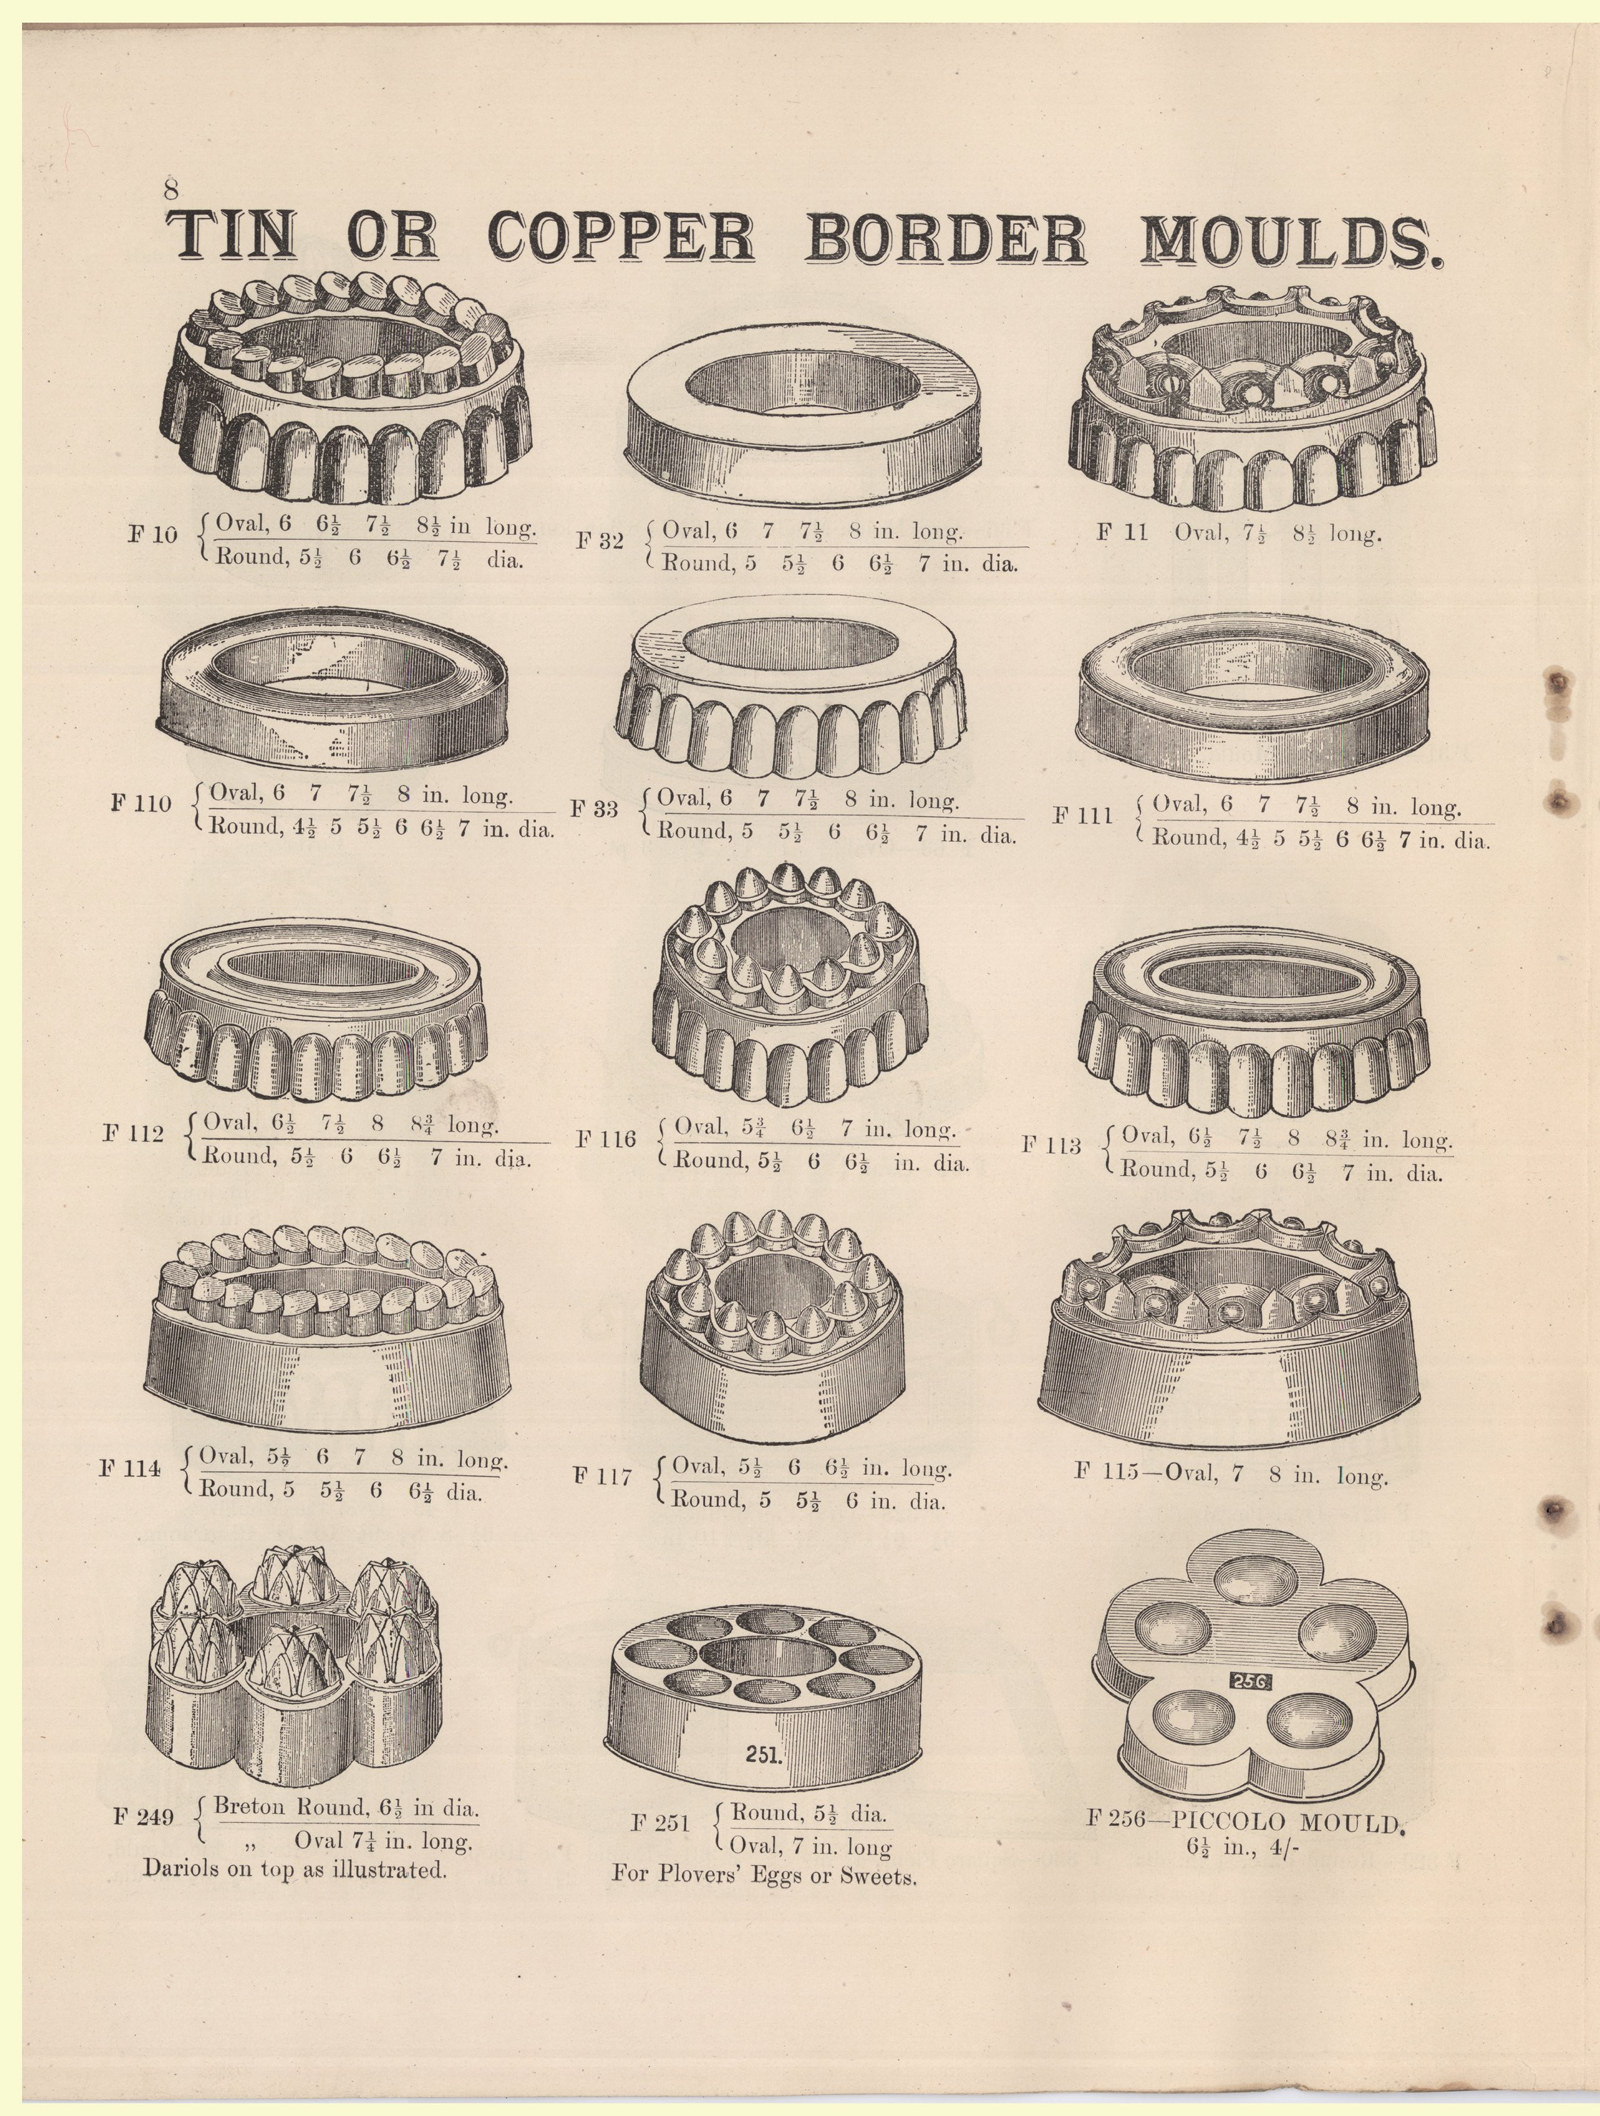 Page from book showing fifteen different mould shapes.